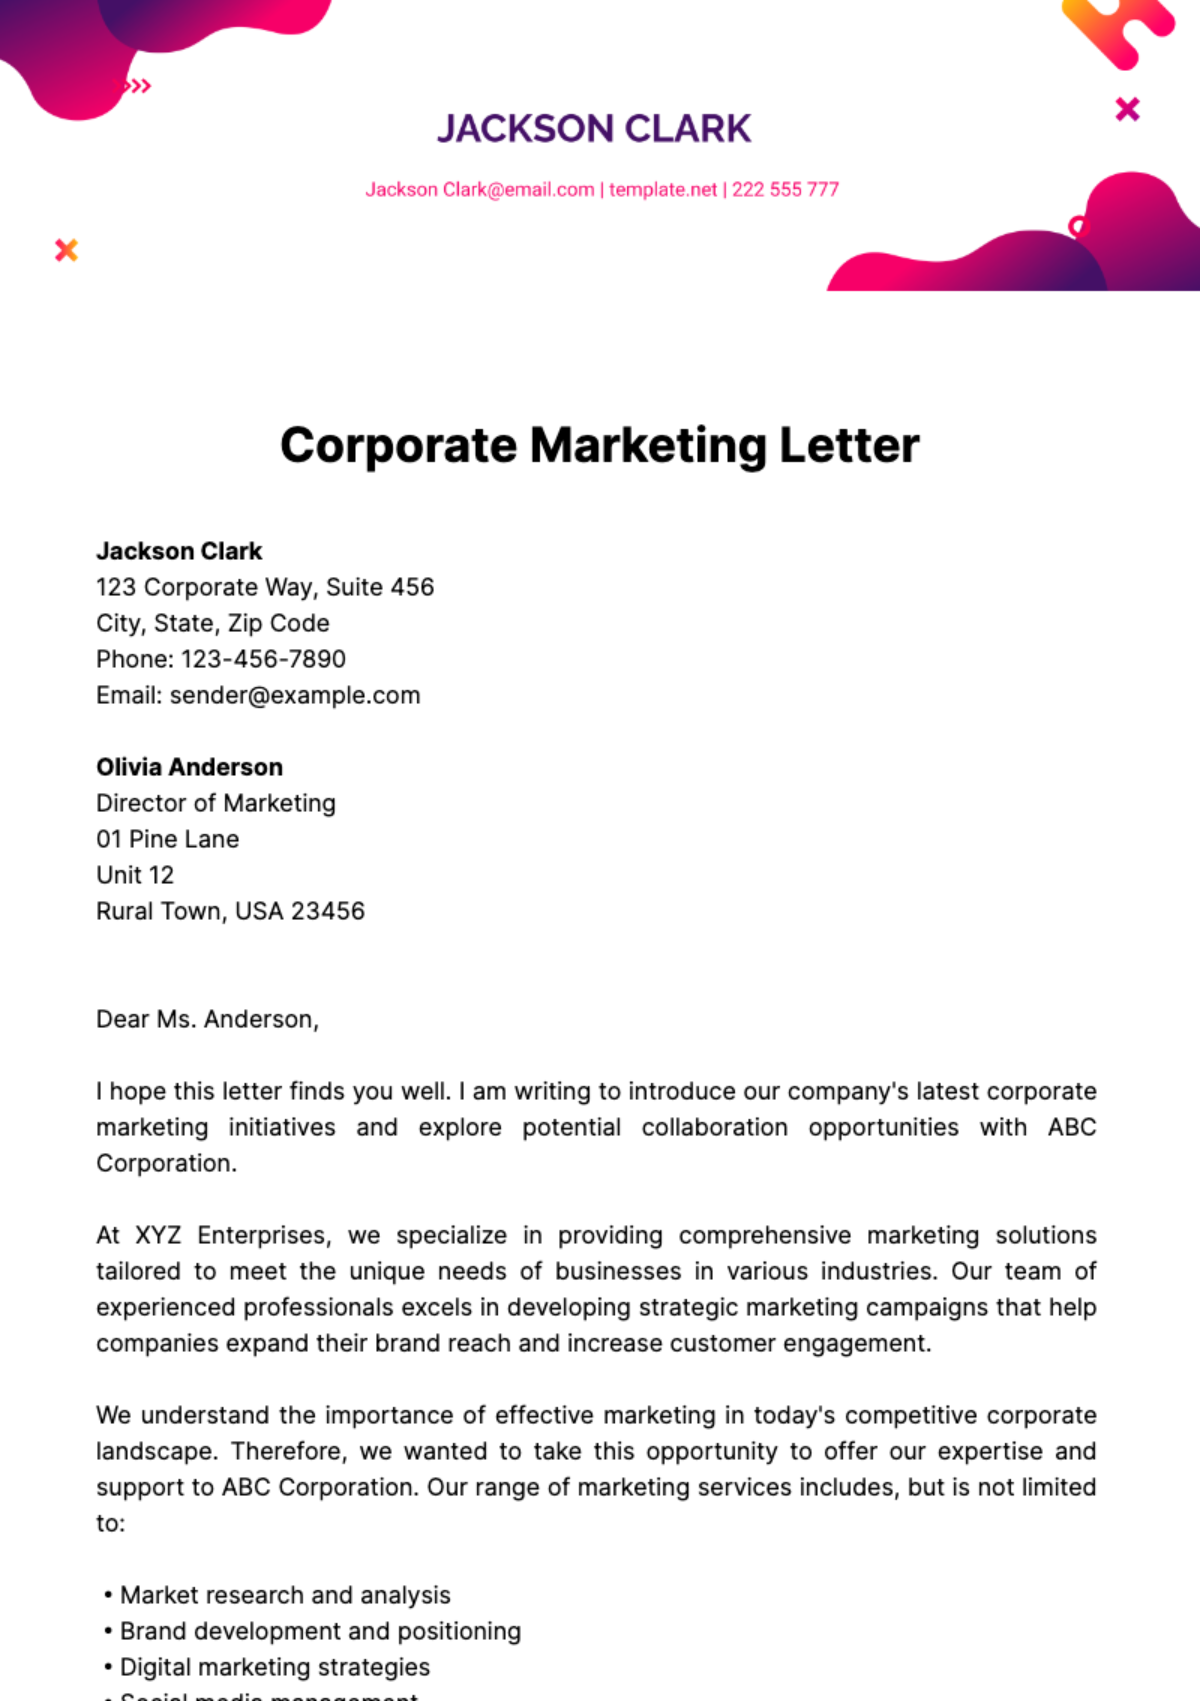 Corporate Marketing Letter Template